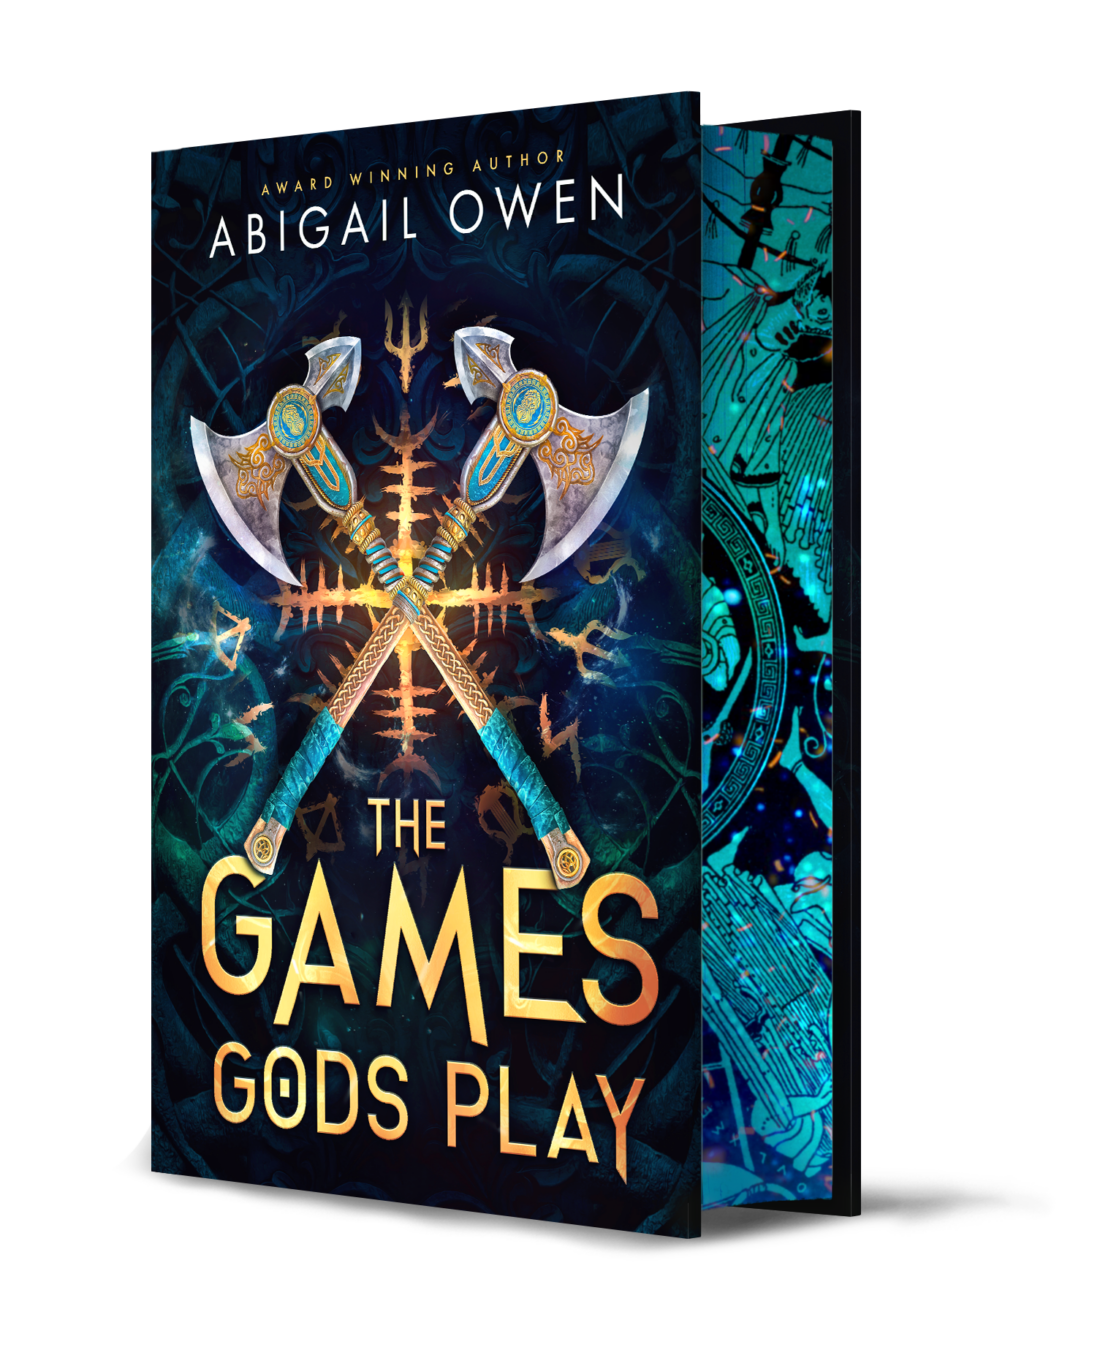 Three-quarter view of the book cover of The Games Gods Play by Abigail Owen, also showing the book's sprayed page edges.